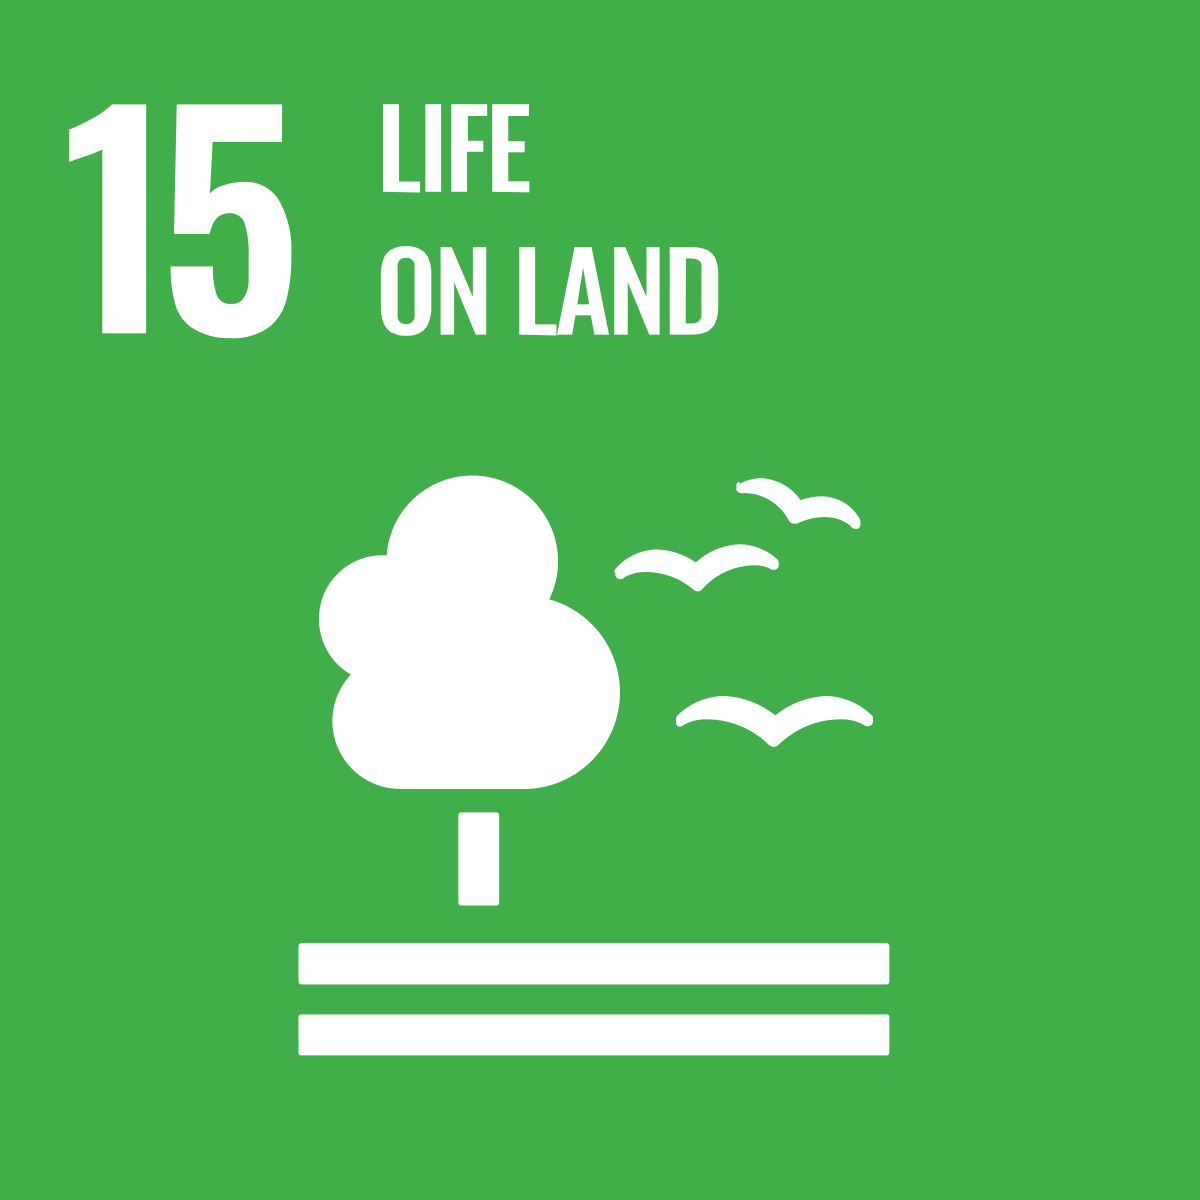 Graphic of Sustainable Goals: 15 Life on Land